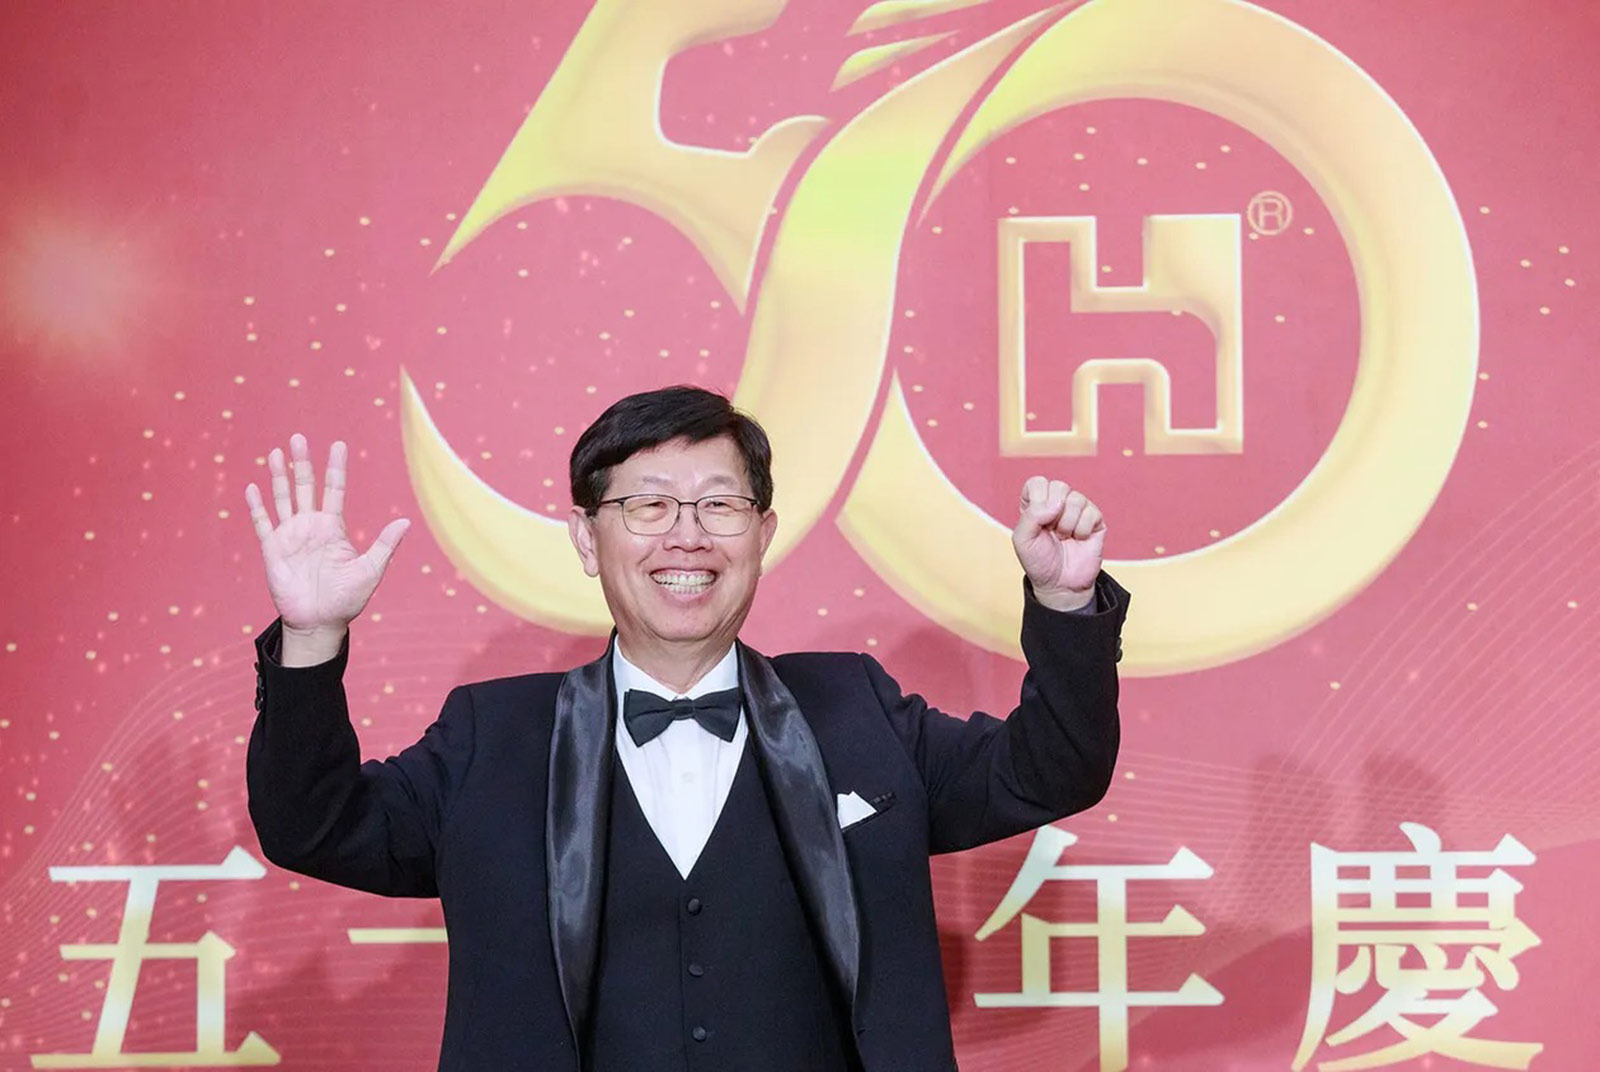 What Foxconn's 50th anniversary party reveals